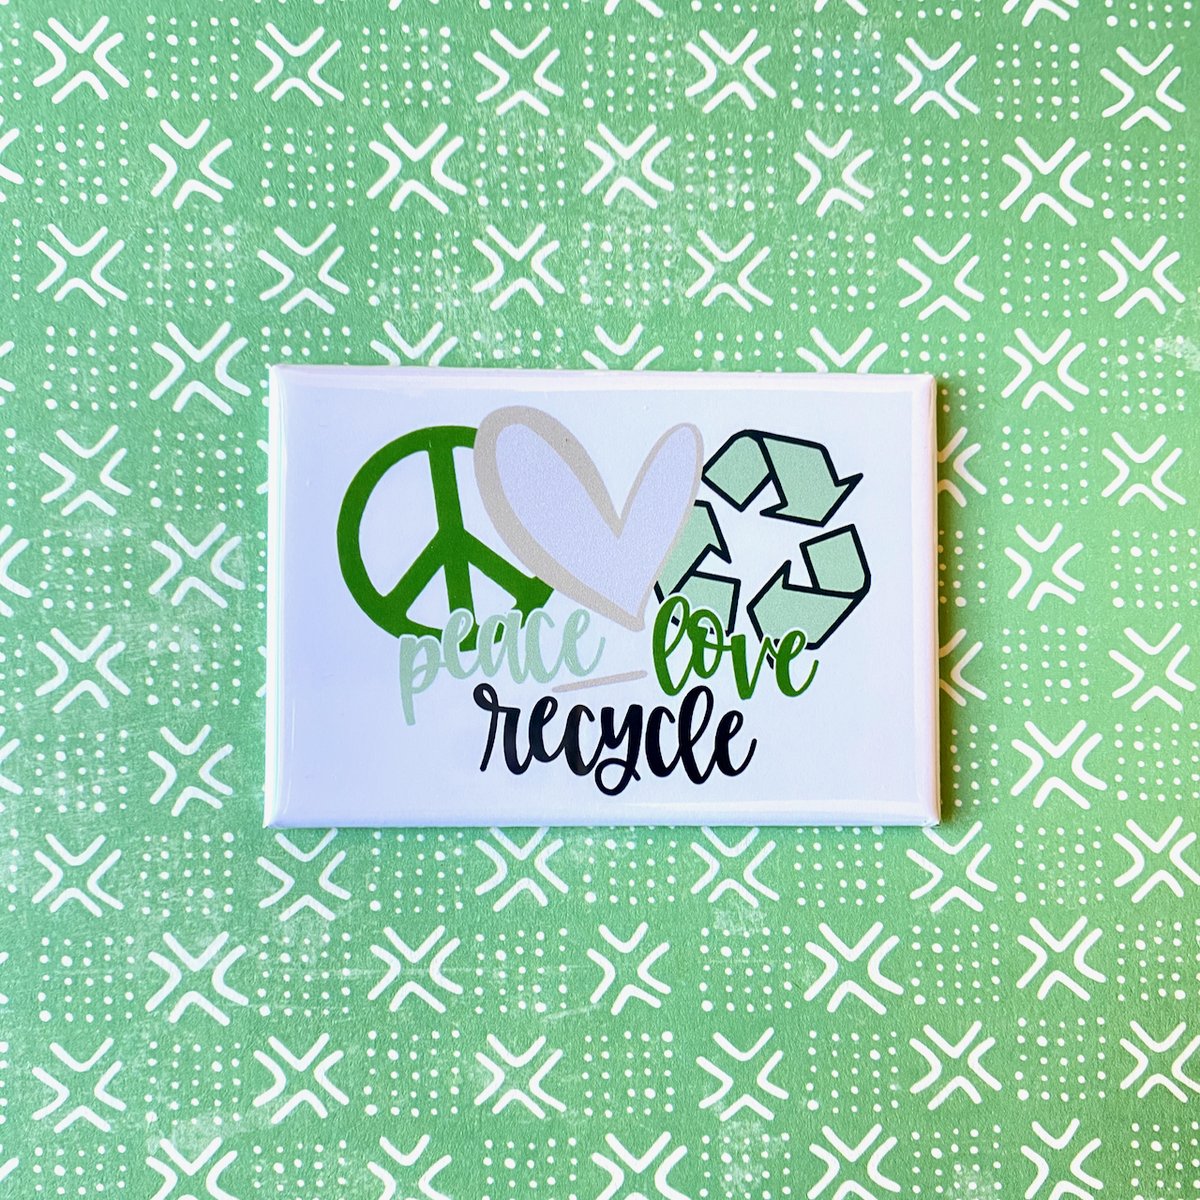 ☮️🩷♻️

#rebelbuttons #custombuttons #flair #pinbackbuttons #buttonmaking #handmade #pins #etsy #shopify #womanownedbusiness #madeintheusa #madeinarizona #magnets #custommagnets #peace #love #recycle #peaceloverecycle #doyourpart